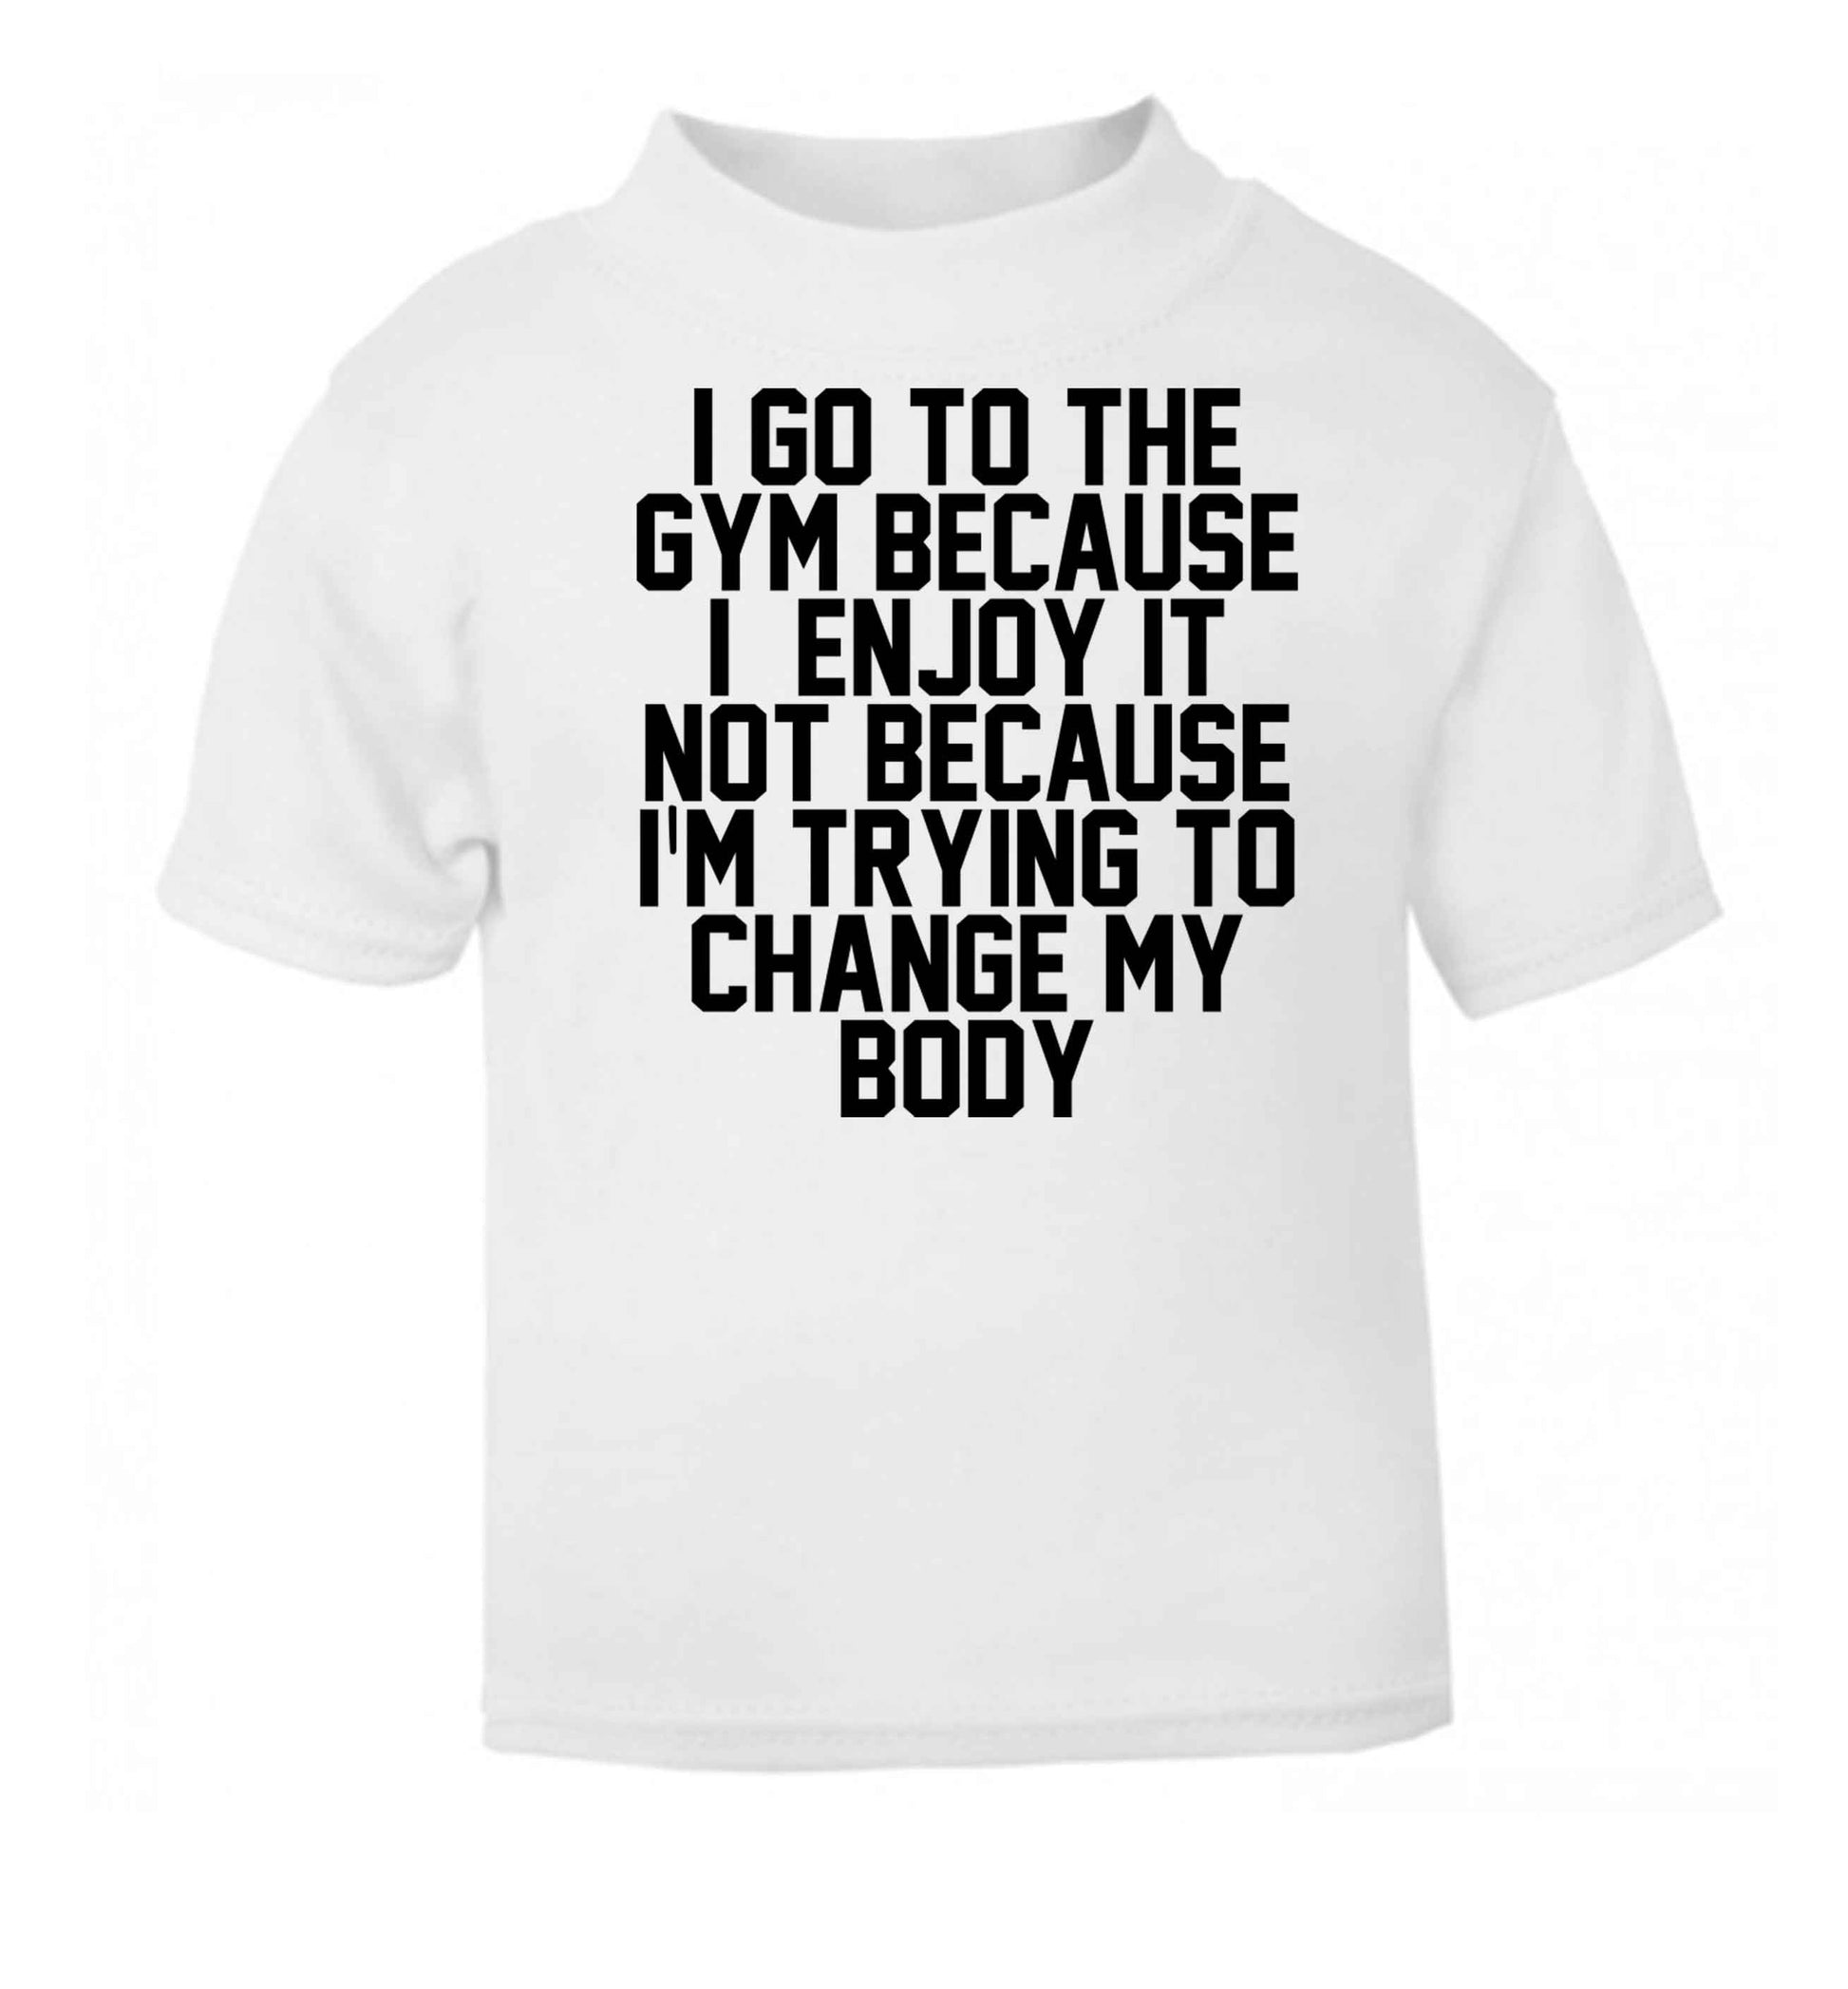 I go to the gym because I enjoy it not because I'm trying to change my body white baby toddler Tshirt 2 Years